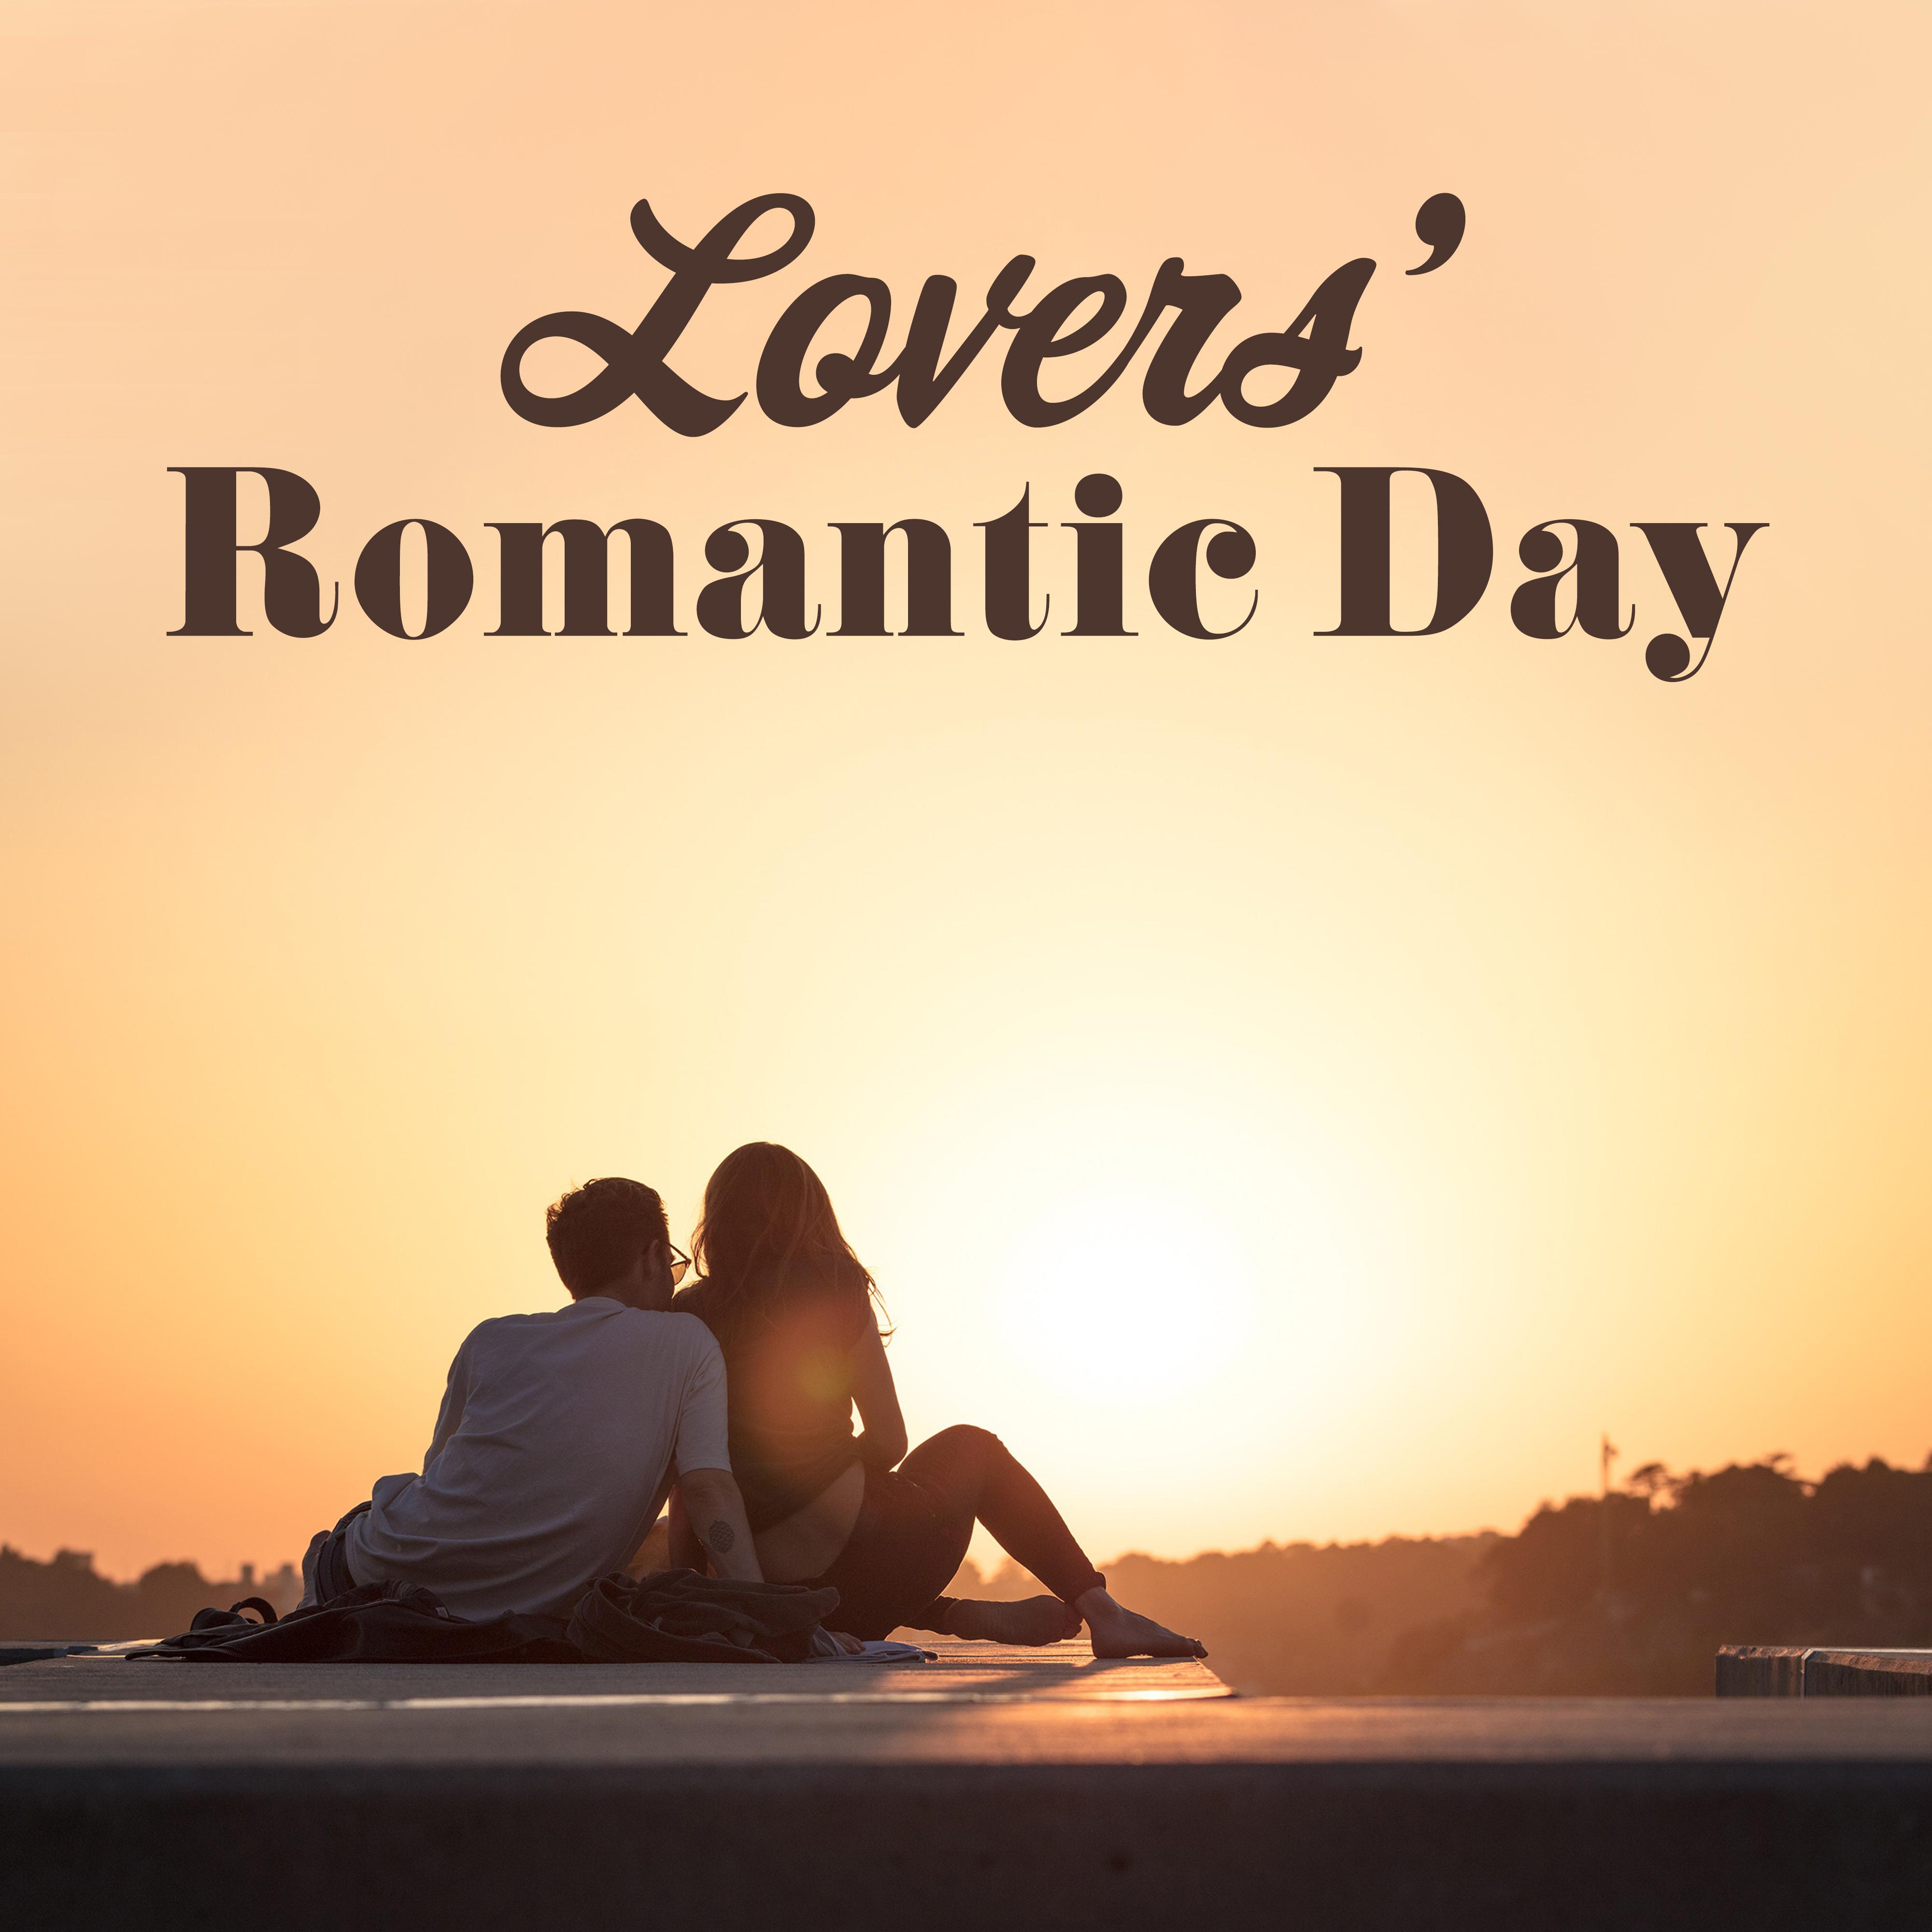 Lovers' Romantic Day: 15 Sensual Jazz Songs with Piano Melodies for Perfect Time Spending with Love, Fresh 2019 Music